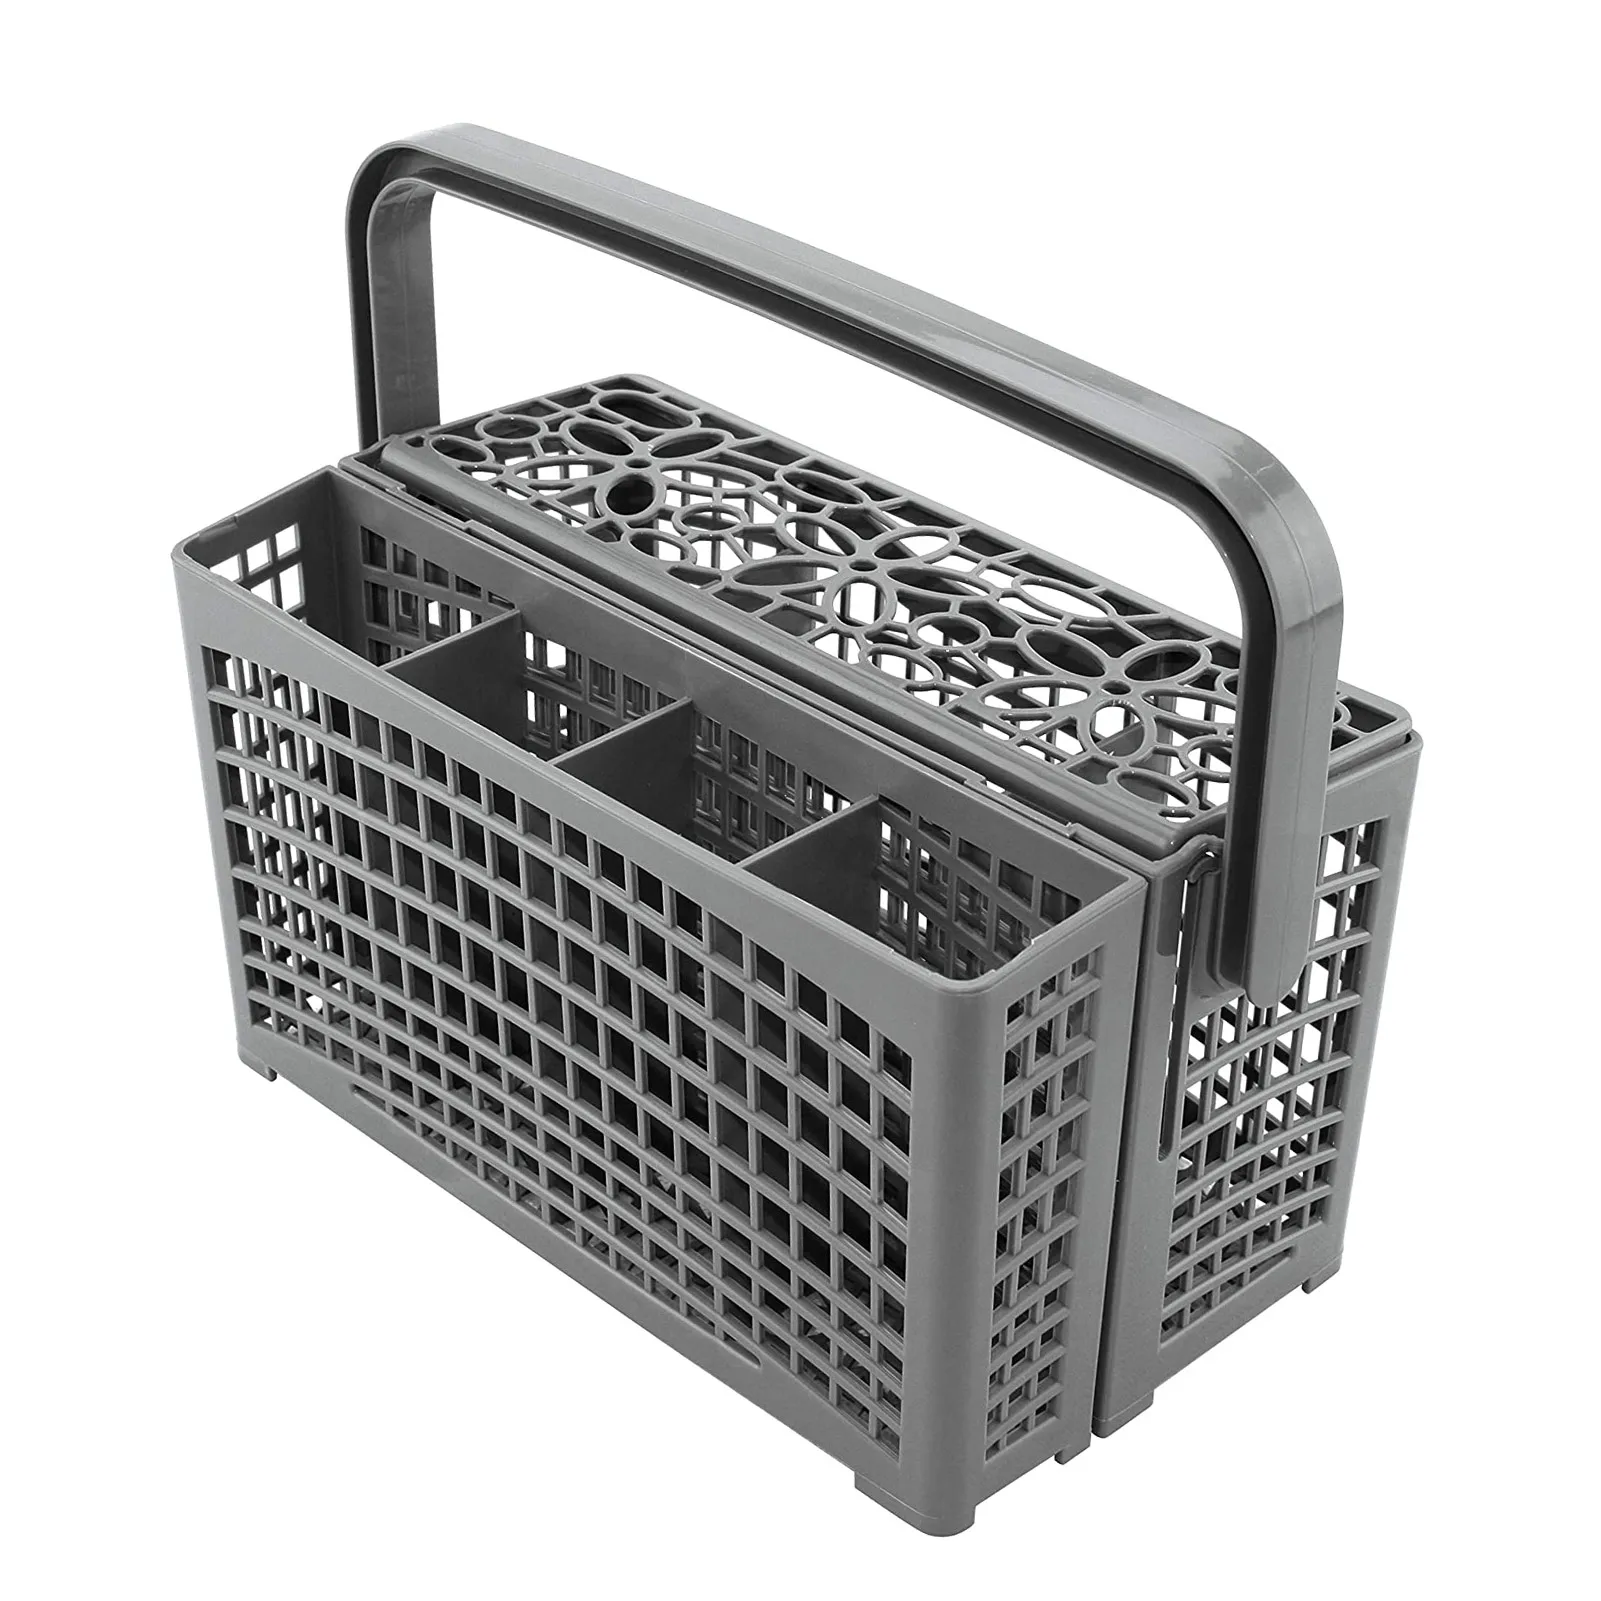 MOUMOUTEN Universal Cutlery Basket Replacement Box for Multipurpose Dishwasher Dishwasher Silverware Cutlery Basket for Cutlery Compatible with Most Brands 